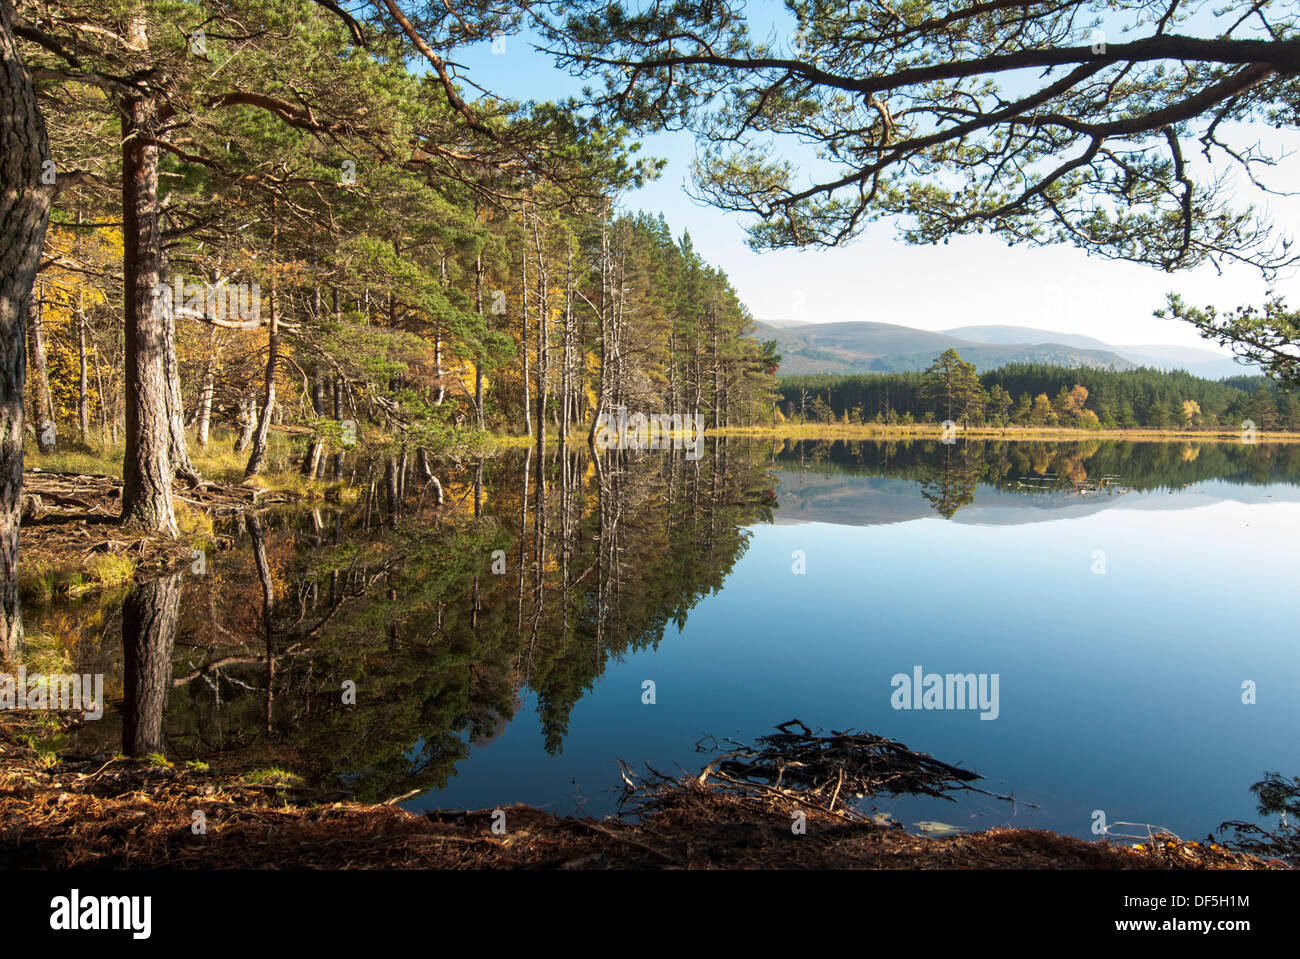 Loch with trees and reflections. Stock Photo